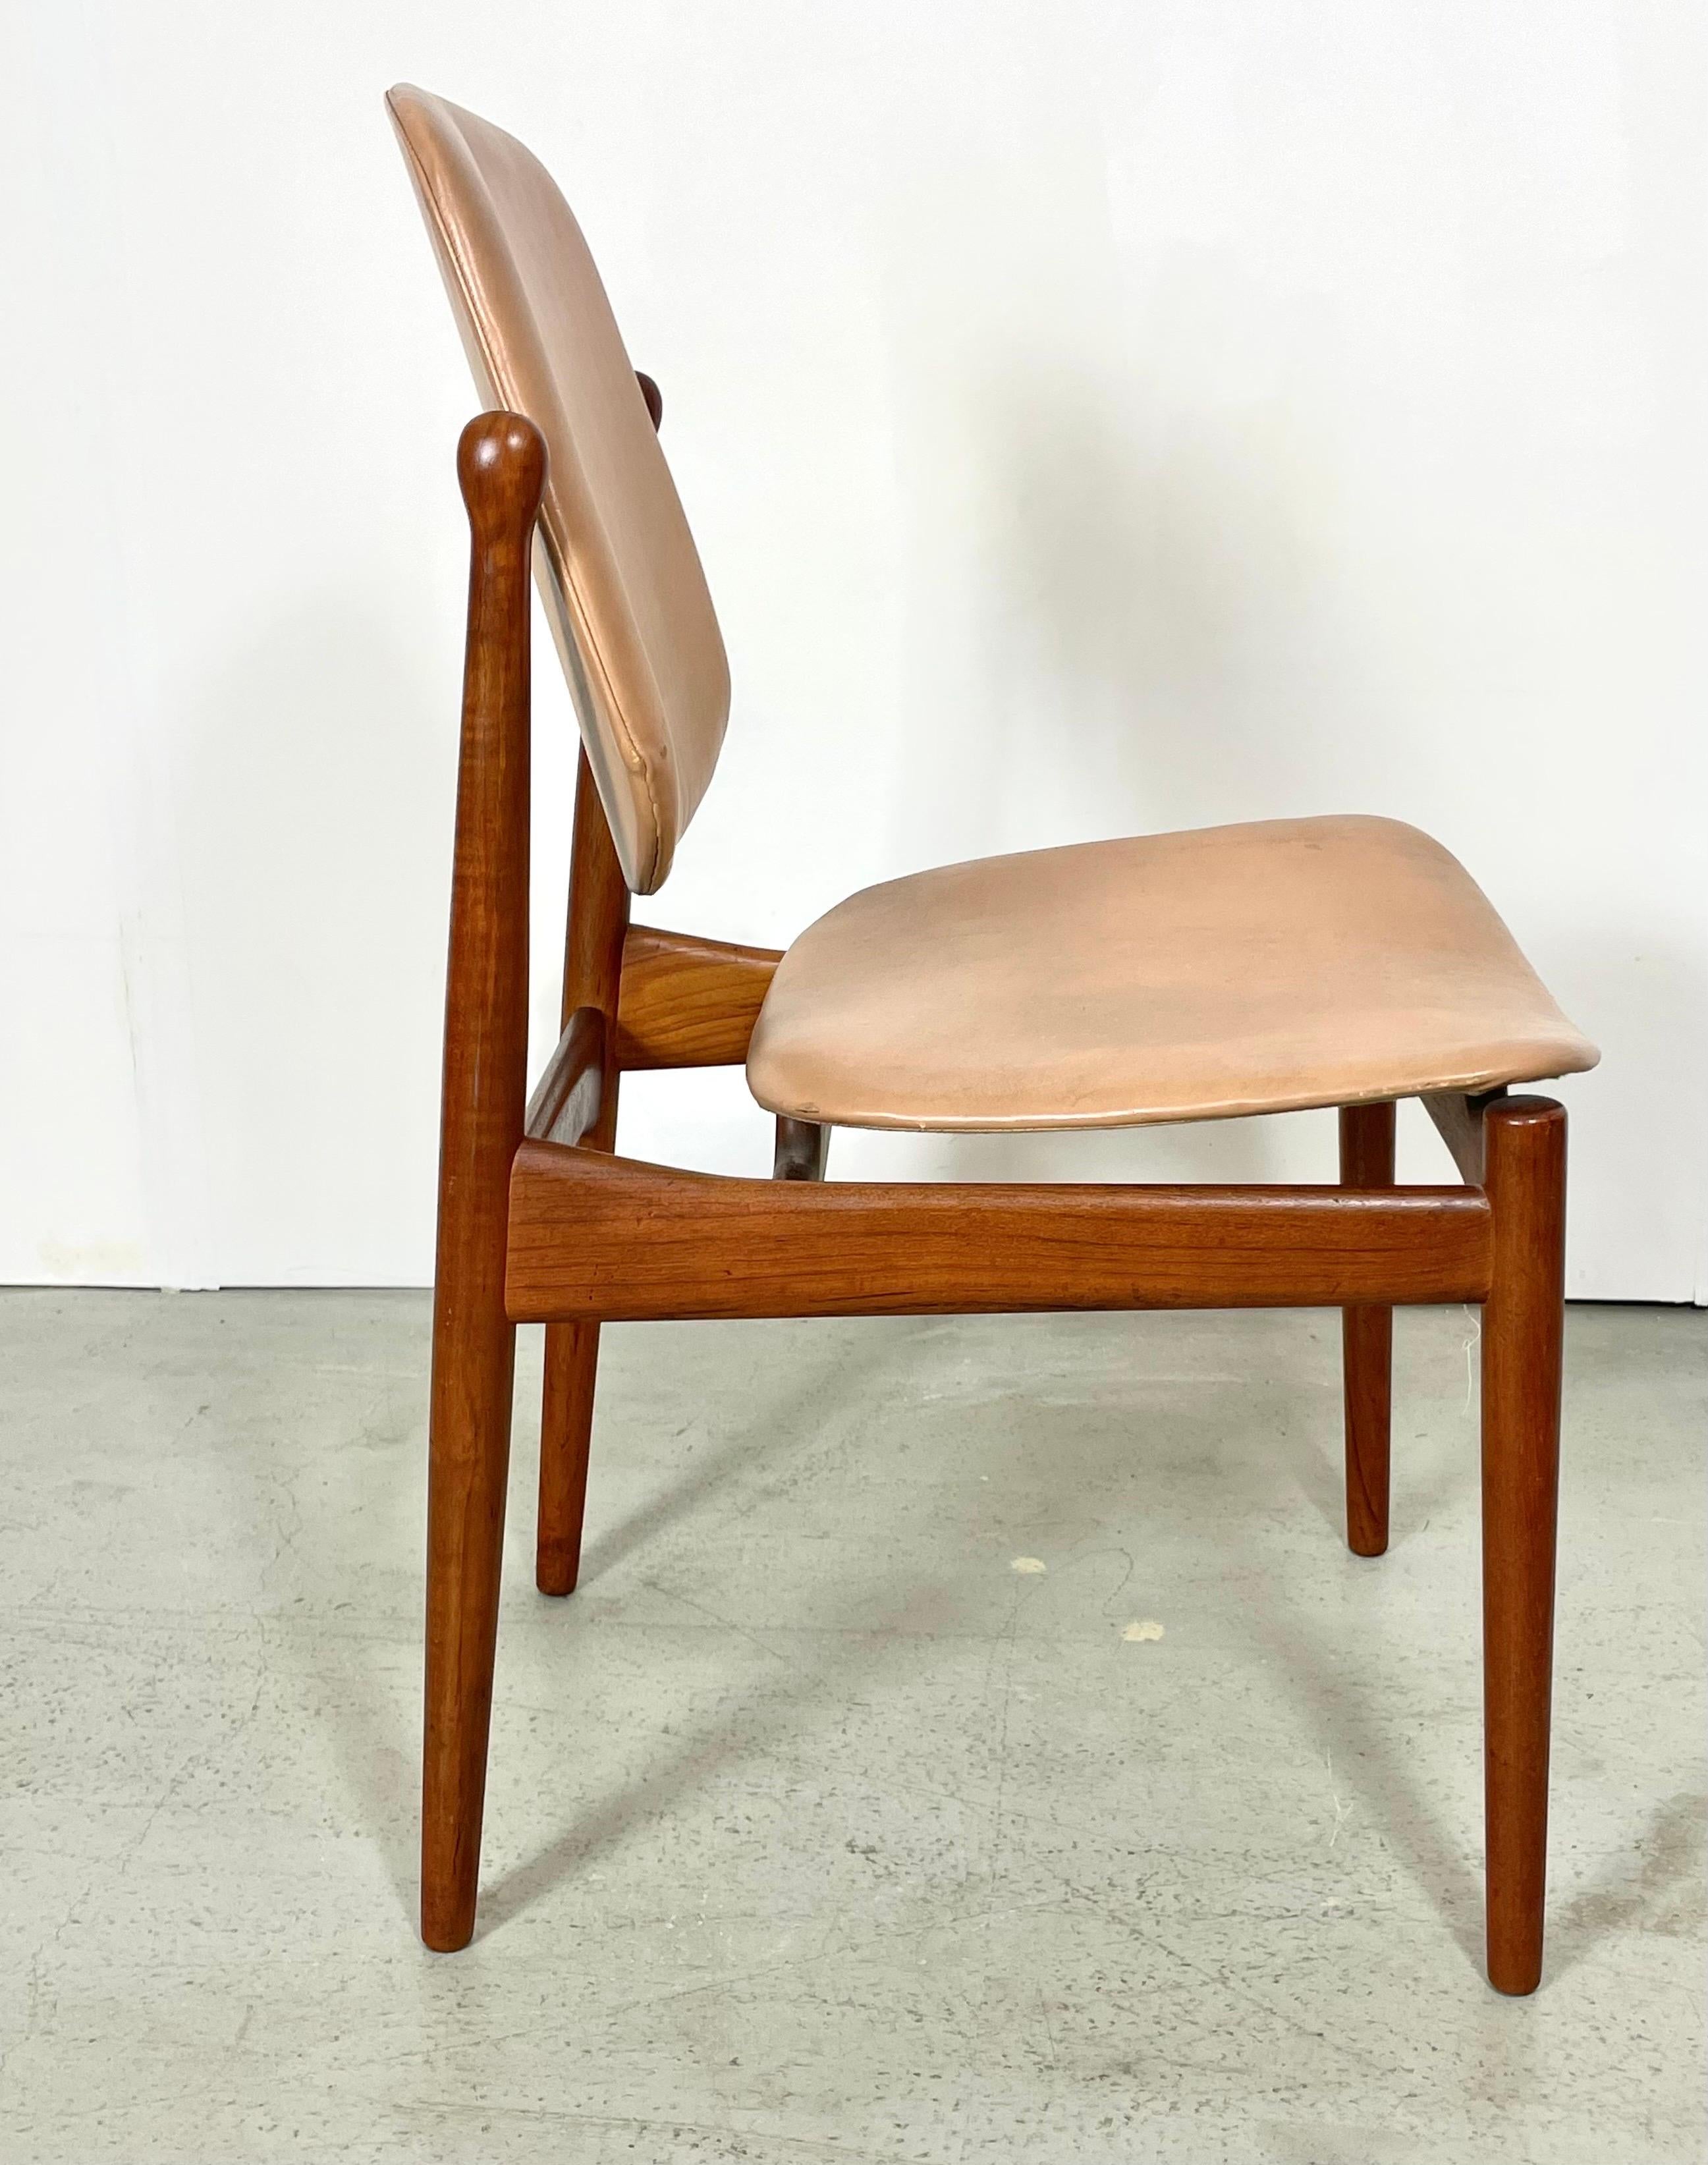 A rare set of four dining chairs model 203 designed by Arne Vodder. Produced by France & Daverkosen in Denmark, during the 1950s. They feature a solid teak wooden frame with the original upholstery in faux leather in a cogniac color. This minimalist